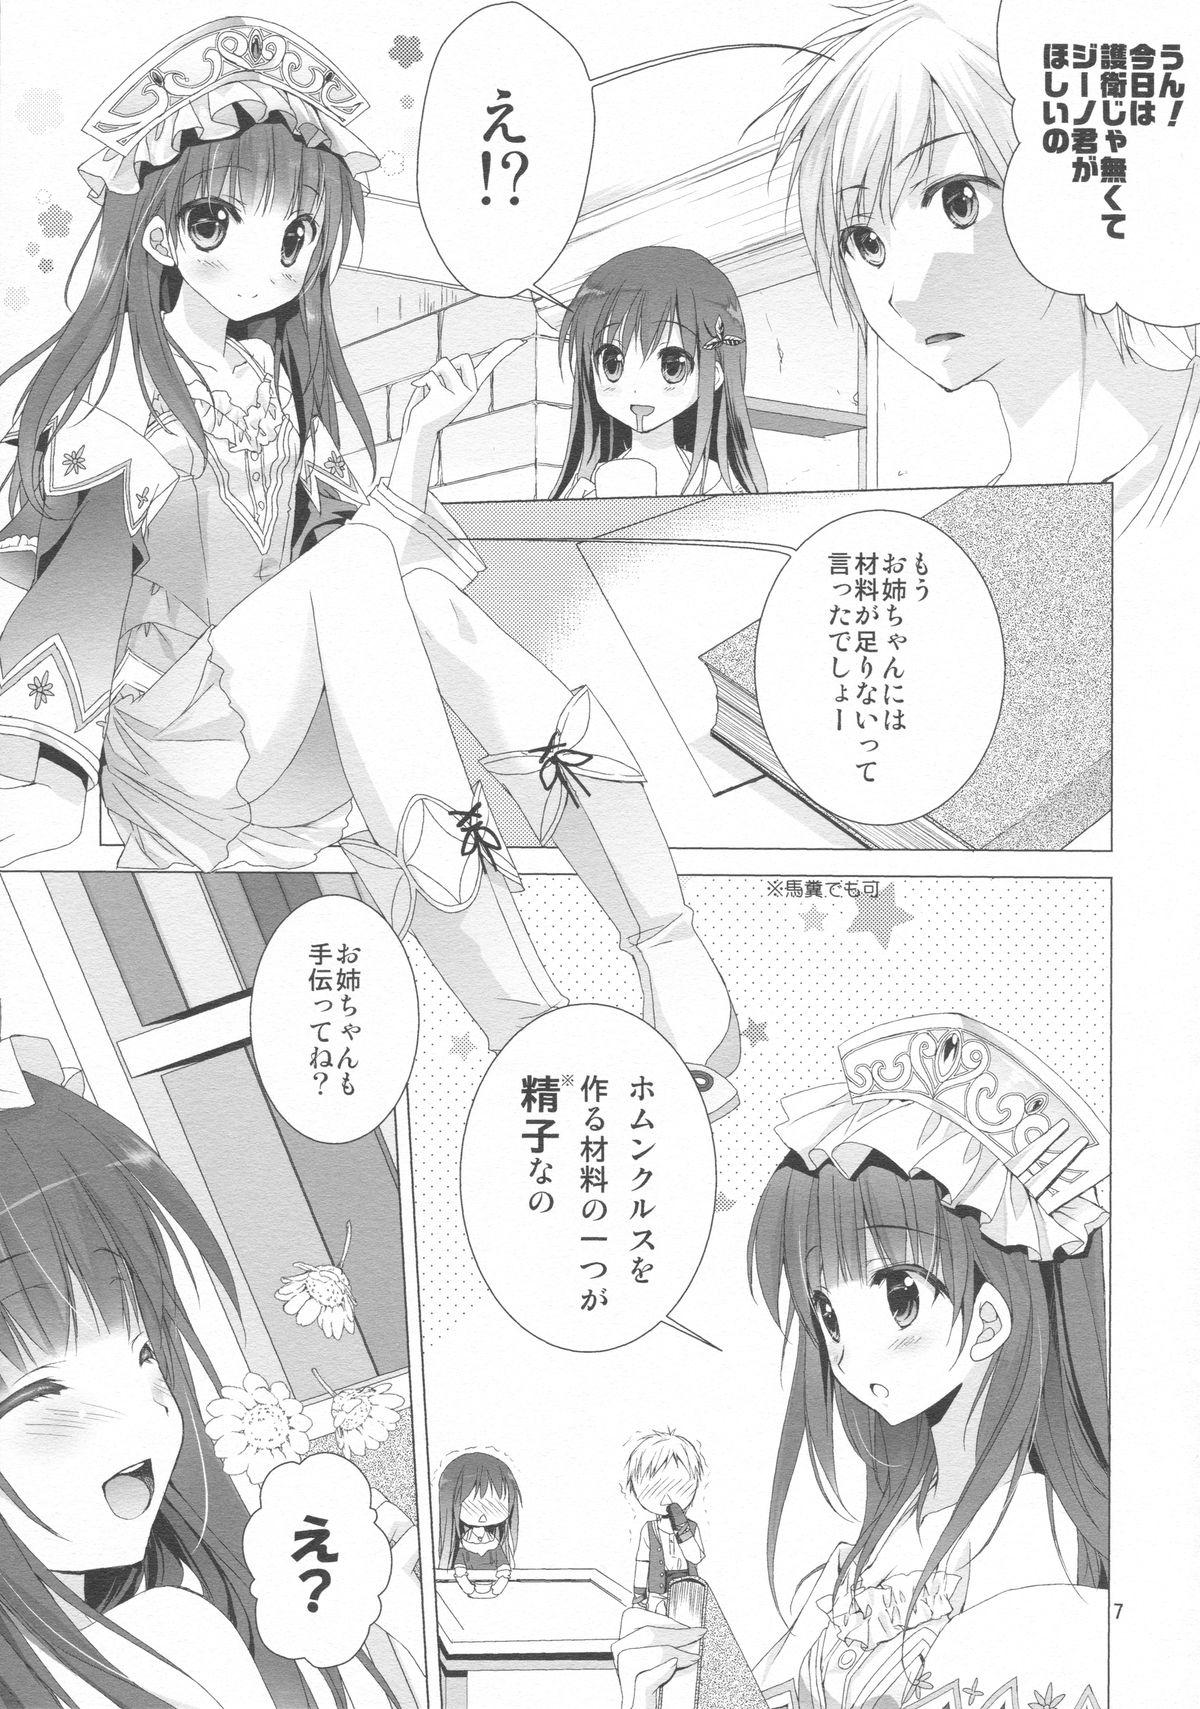 Blows 2-Shuume no True End - Atelier totori Monstercock - Page 5